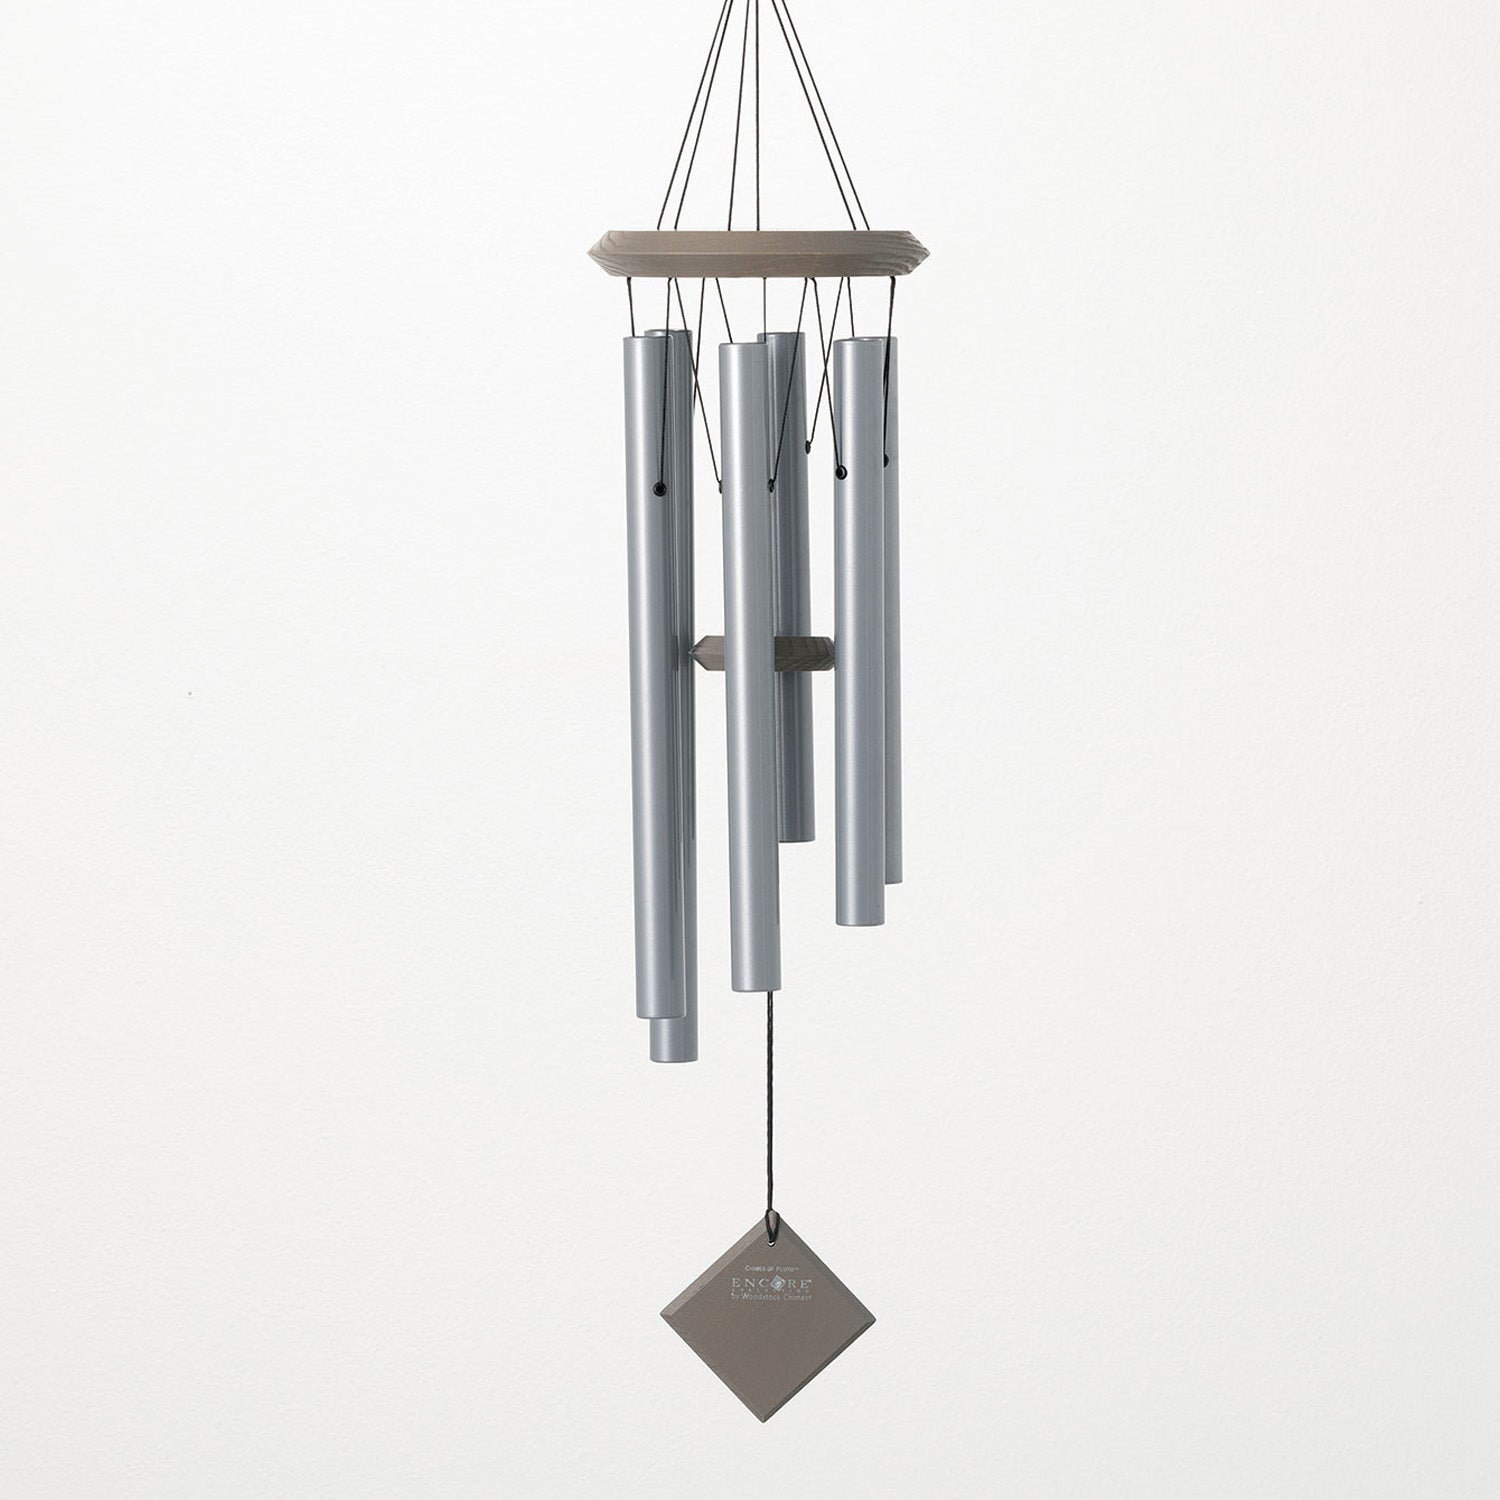 Woodstock Chimes Encore Collection Metal Wind Chime